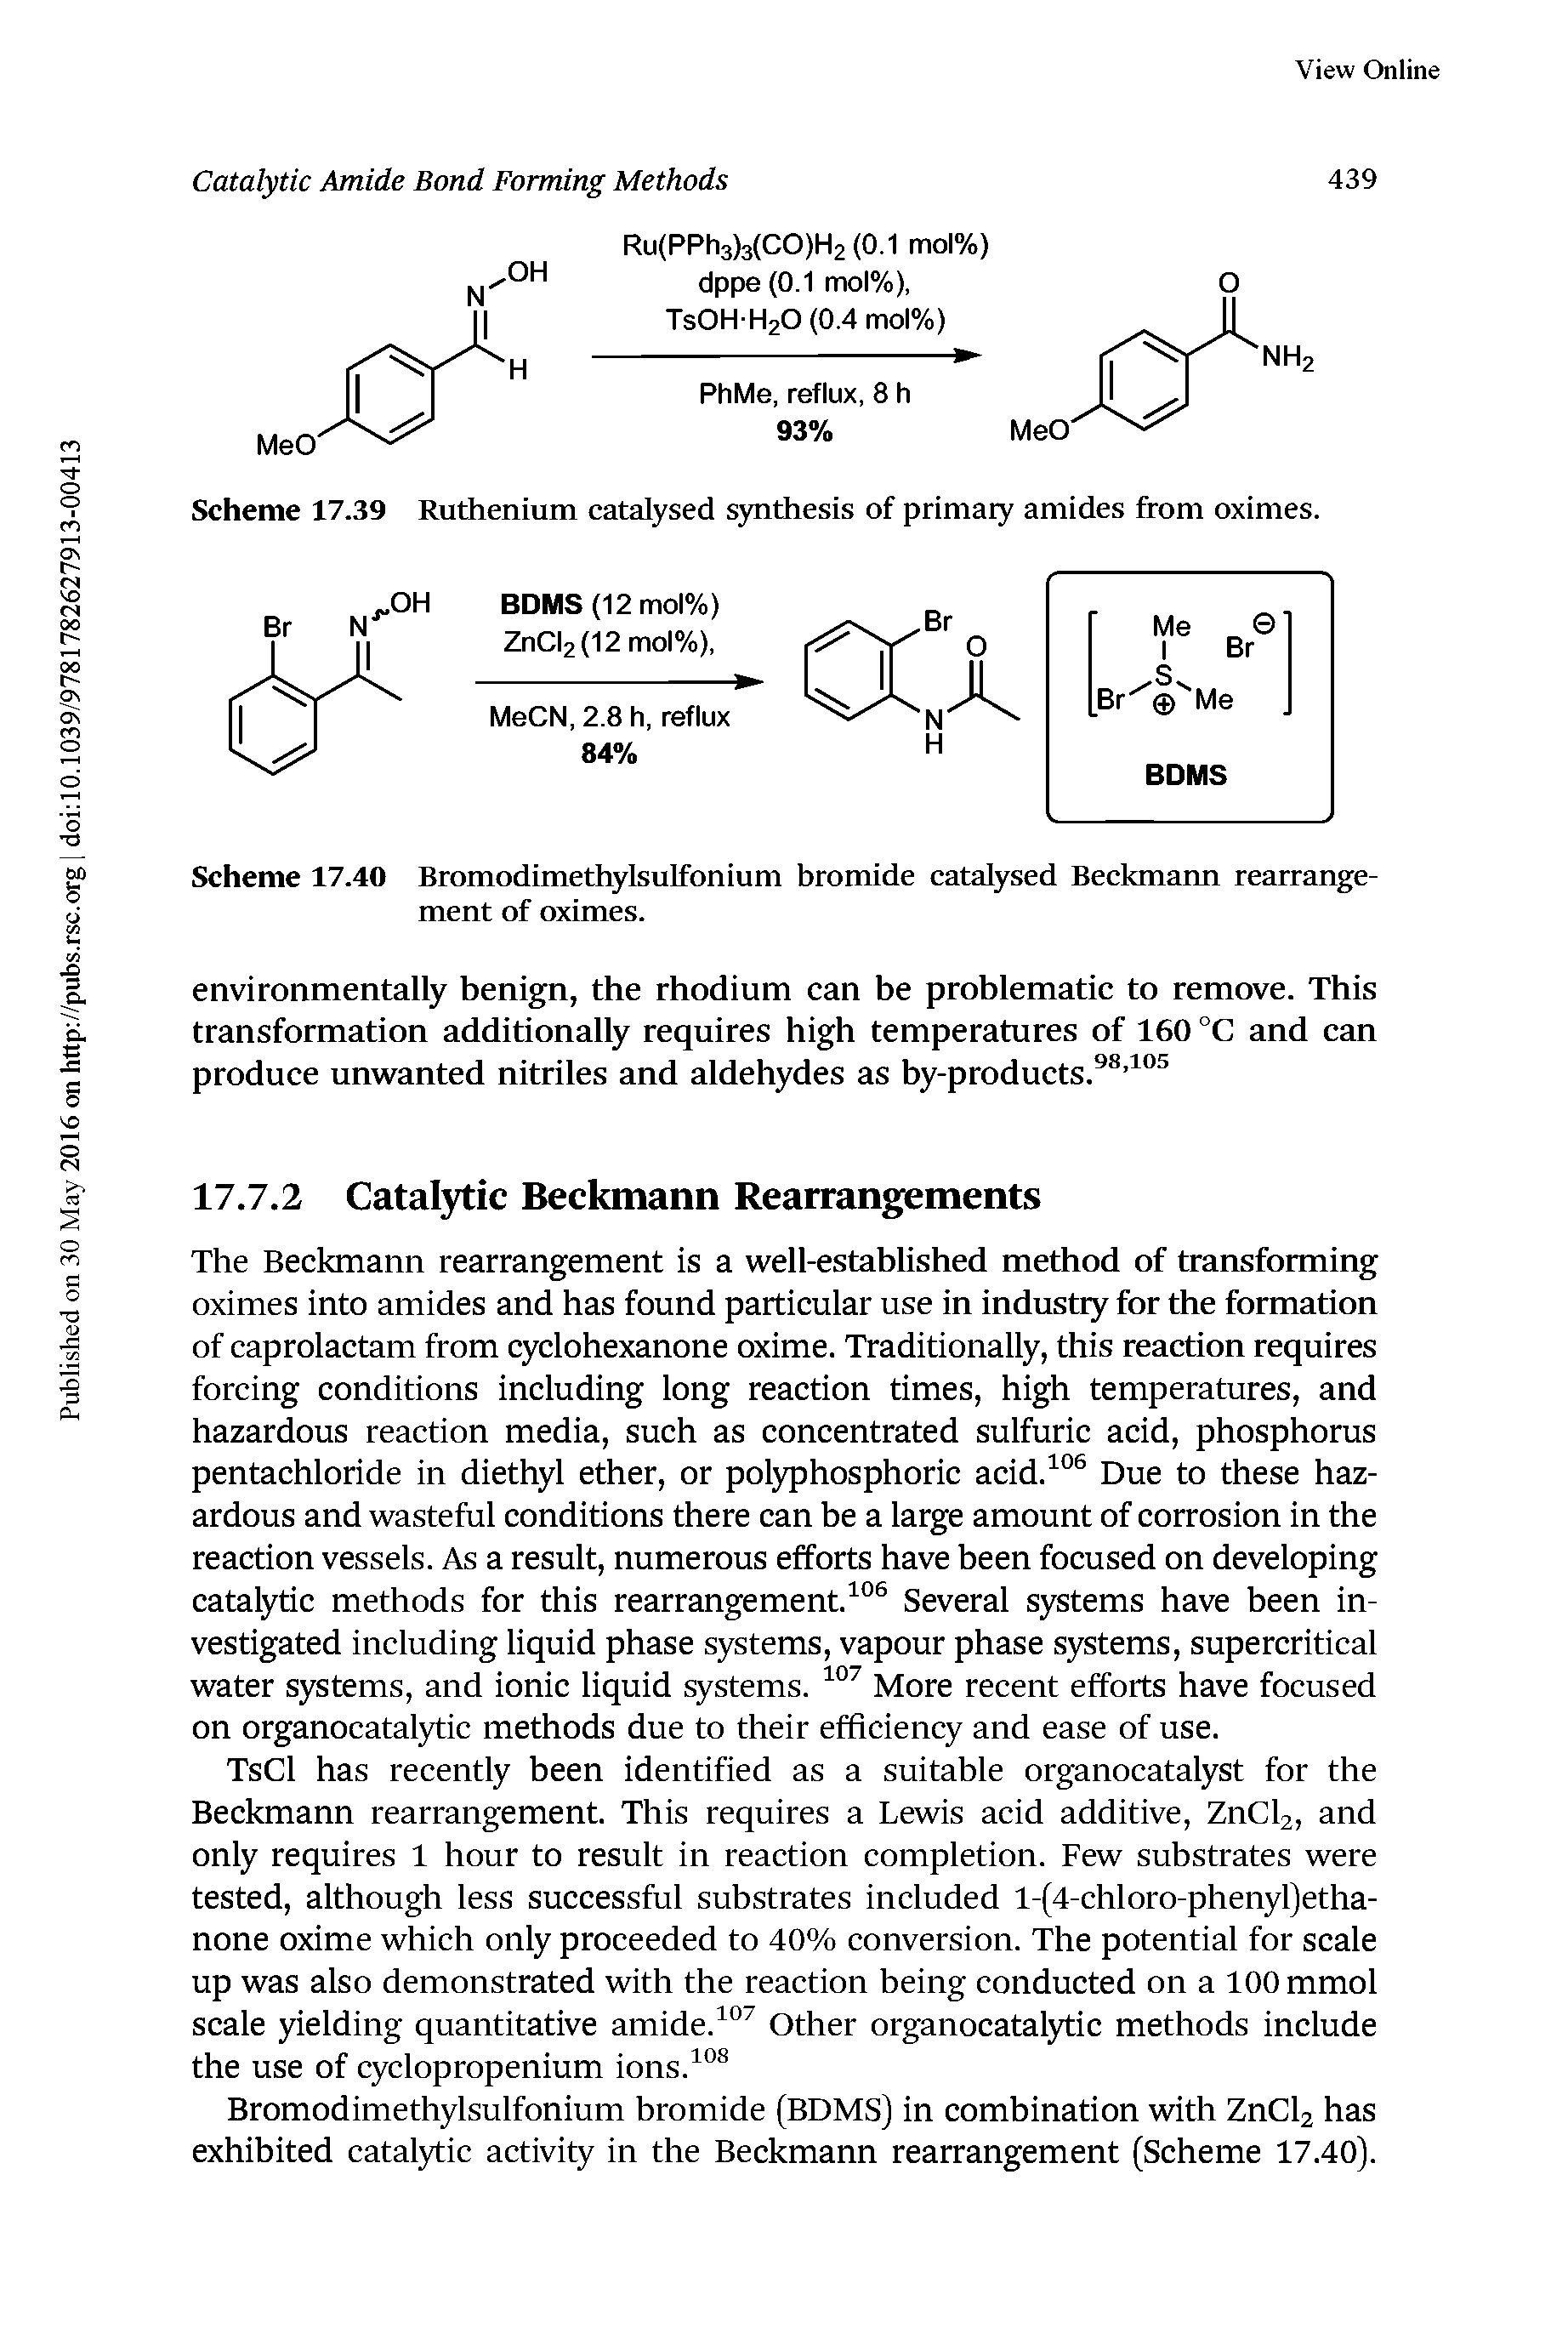 Scheme 17.39 Ruthenium catalysed qmthesis of primary amides from oximes.